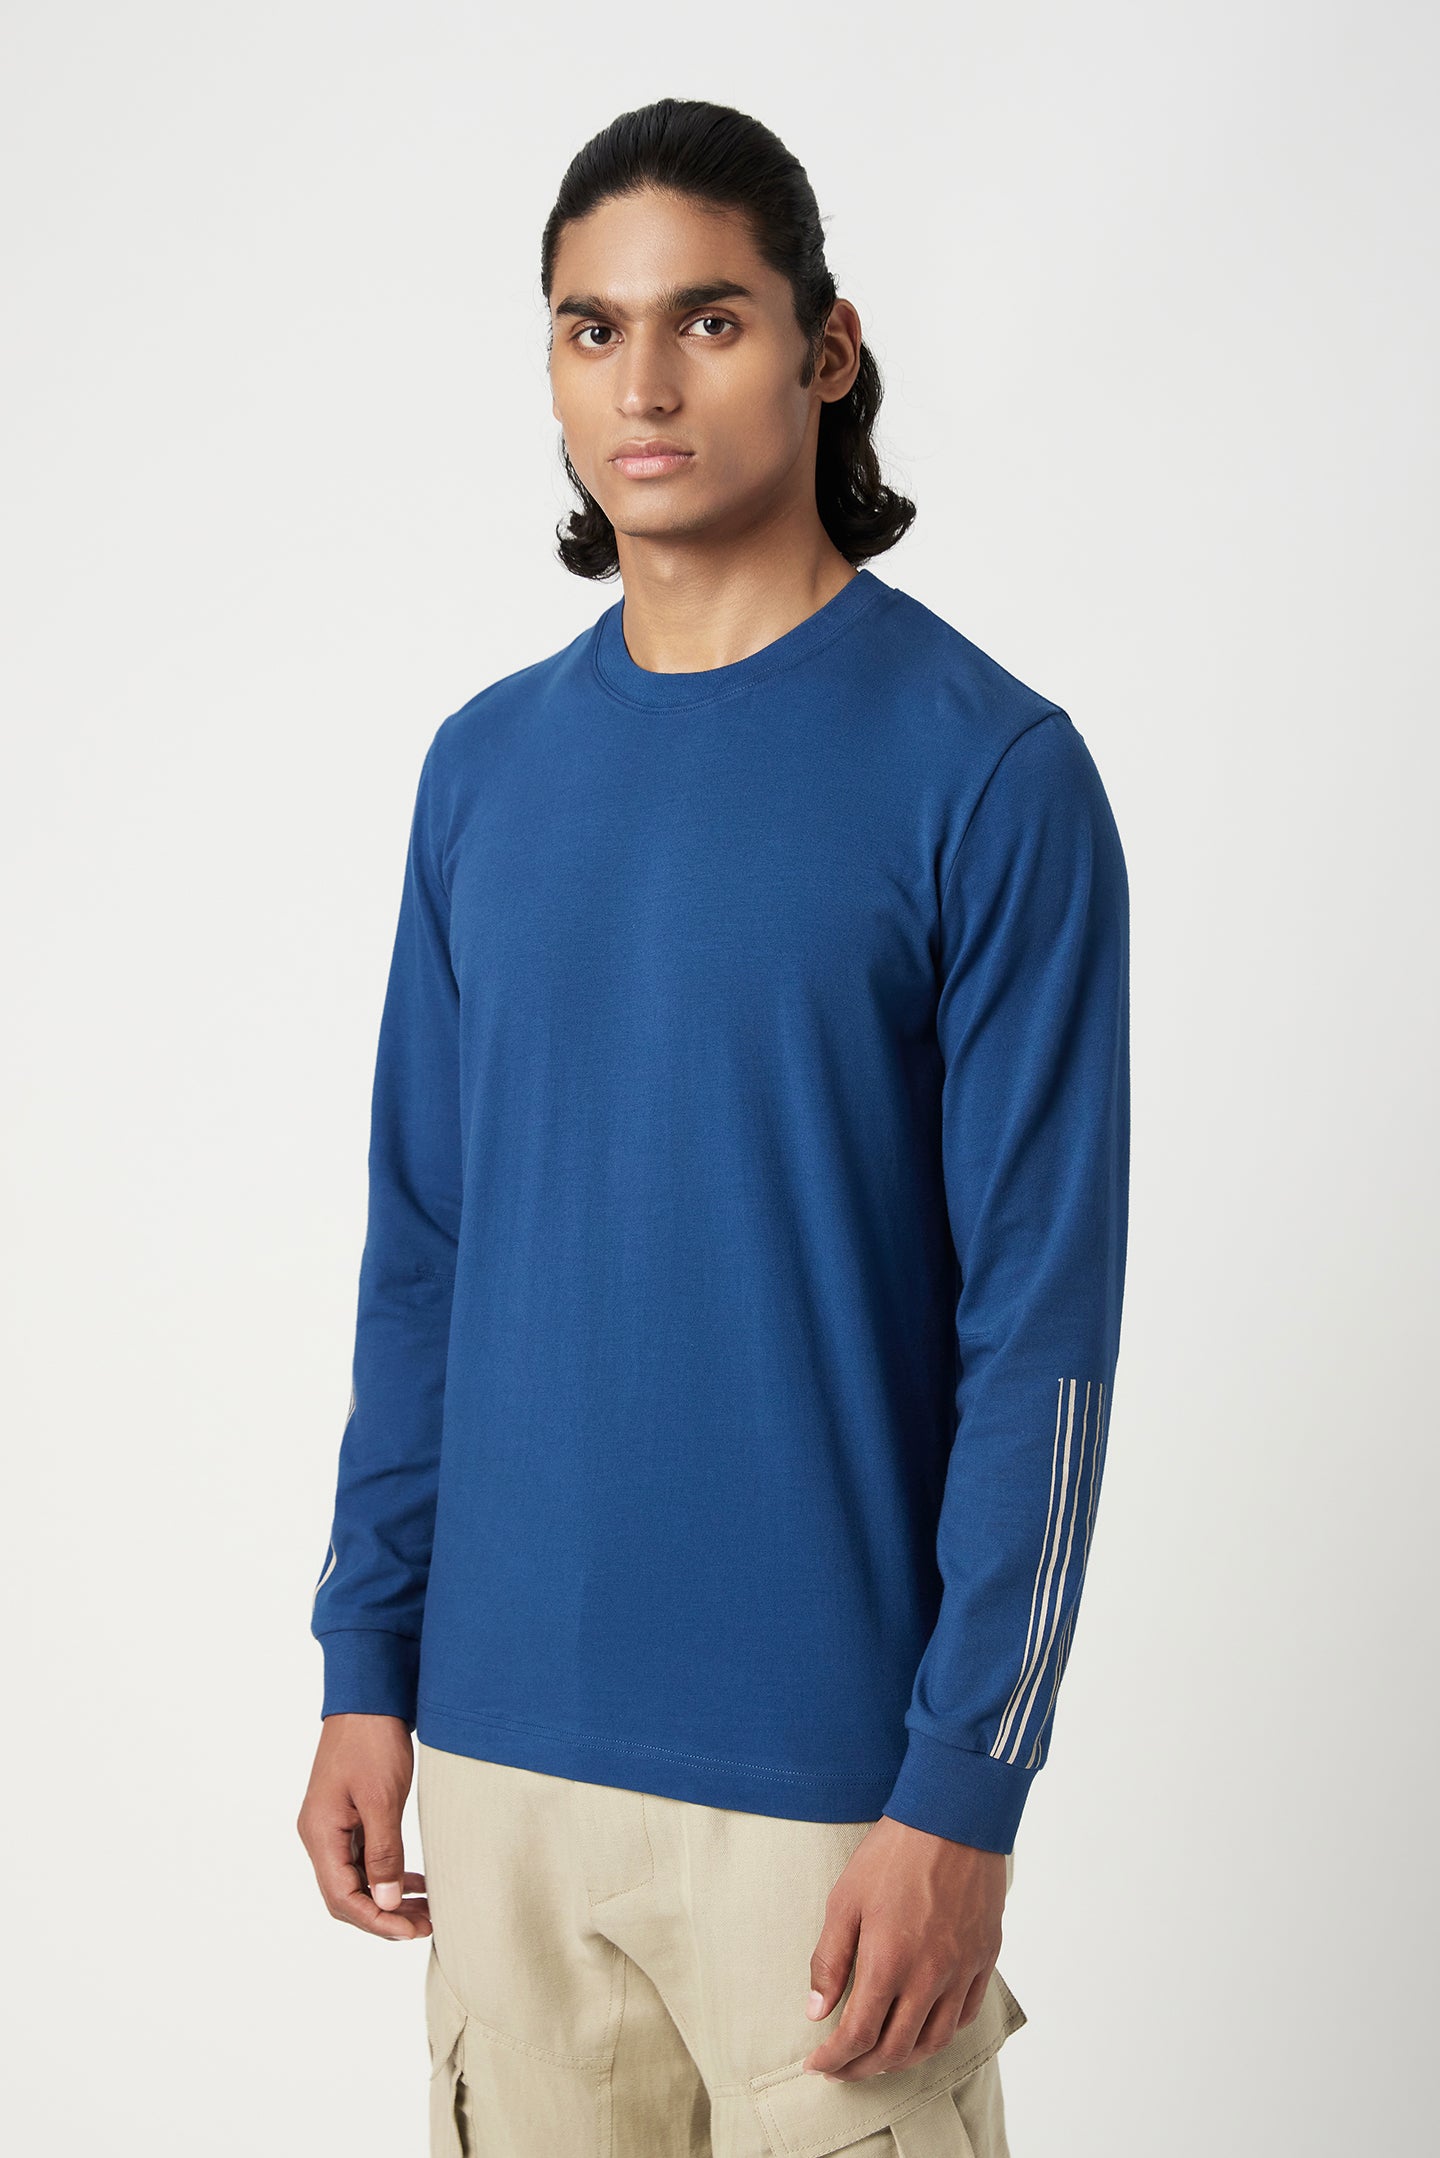 Classic Fit Full Sleeve T-Shirt with Line Print Placement